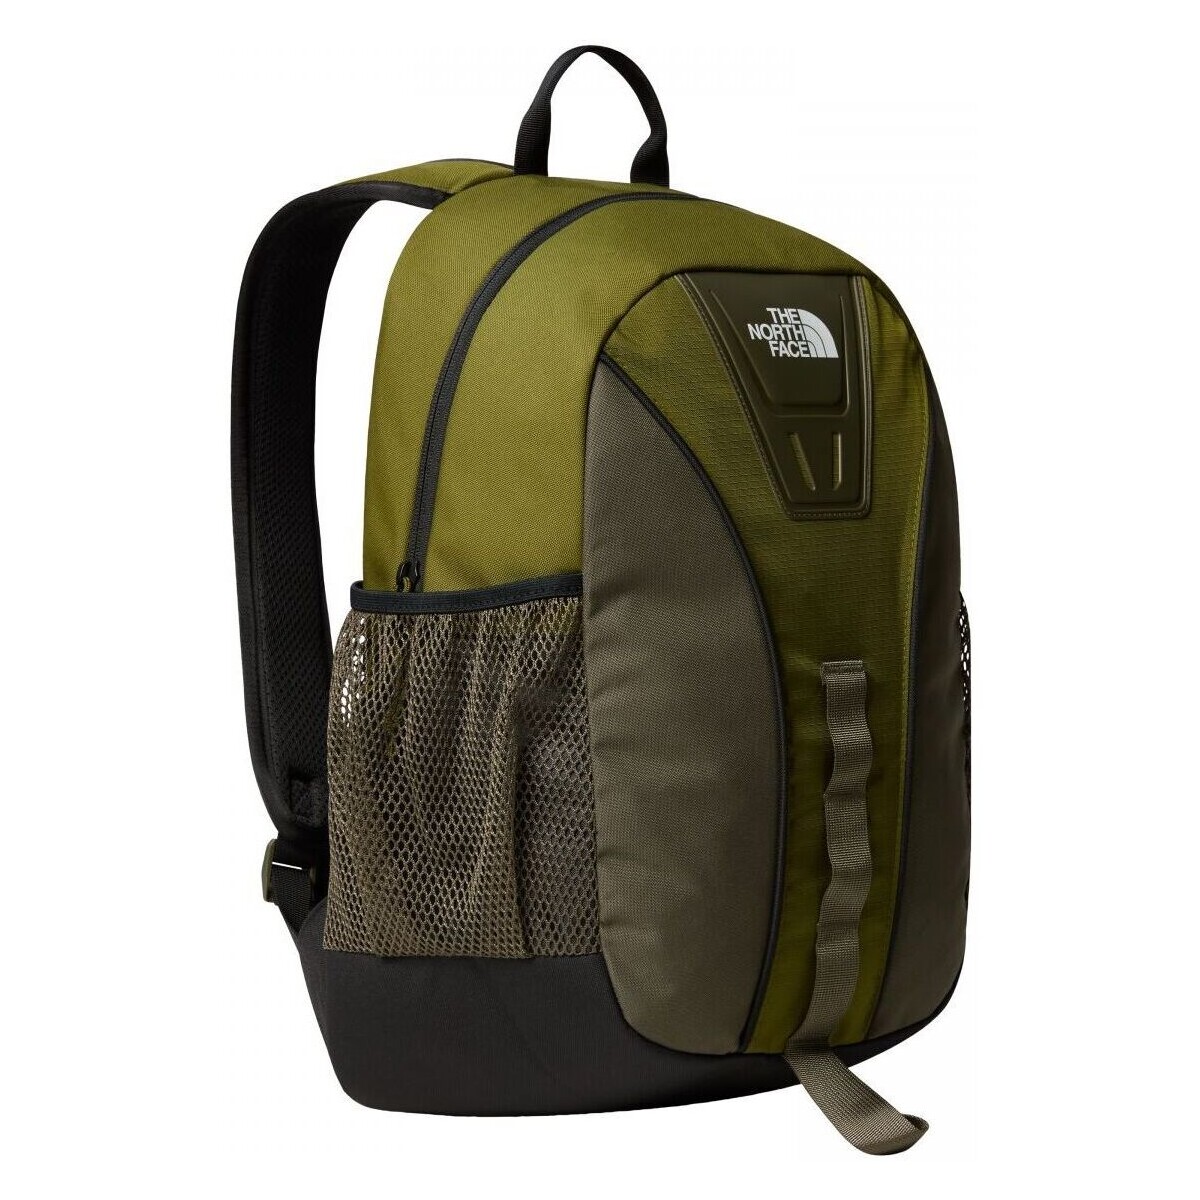 Sacs Sacs à dos The North Face NF0A87GG DAYPACK-RMO FOREST OLIVE Vert